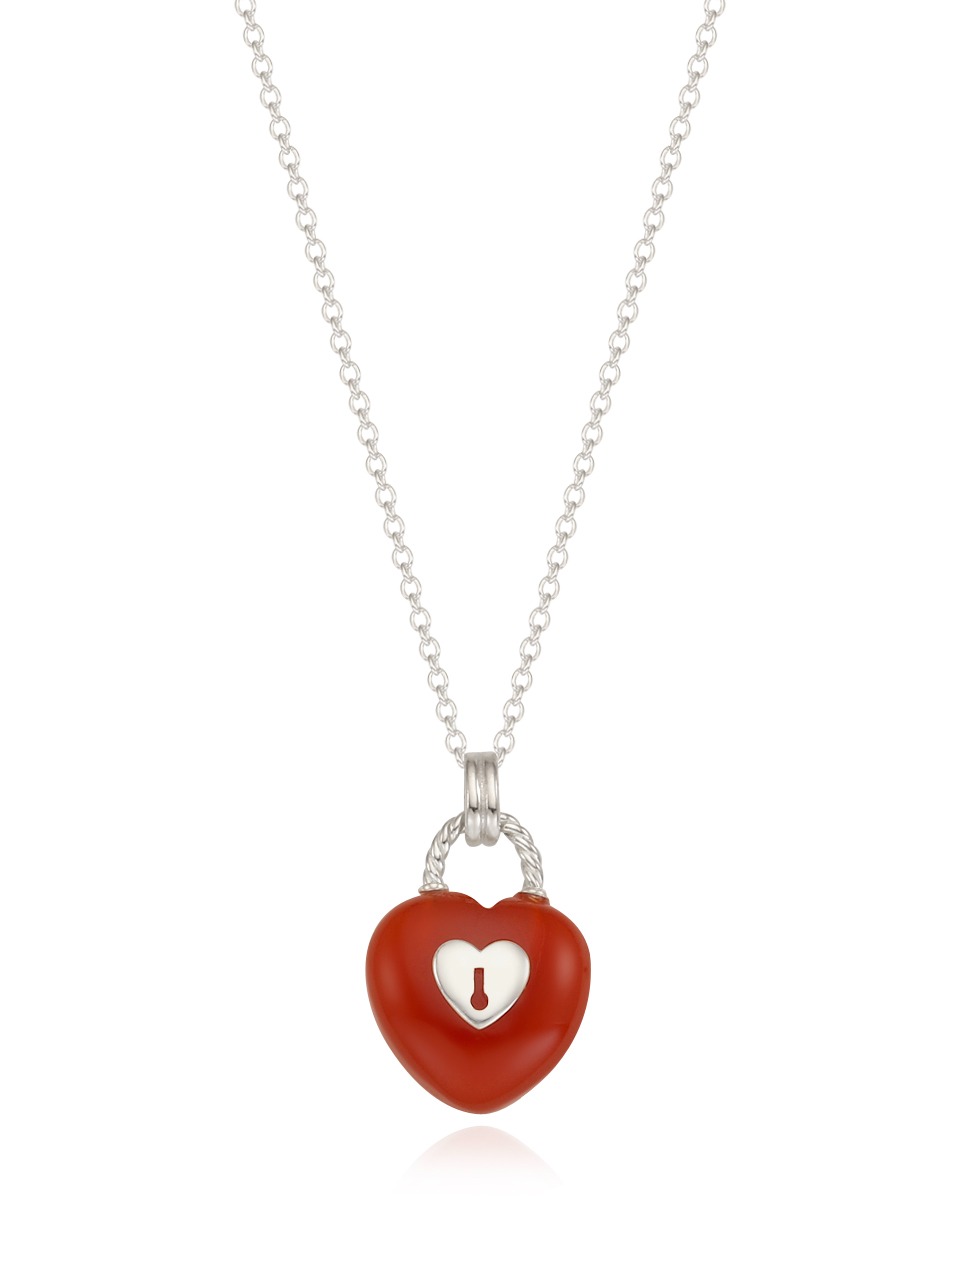 Heart Lock Necklace (red agate)